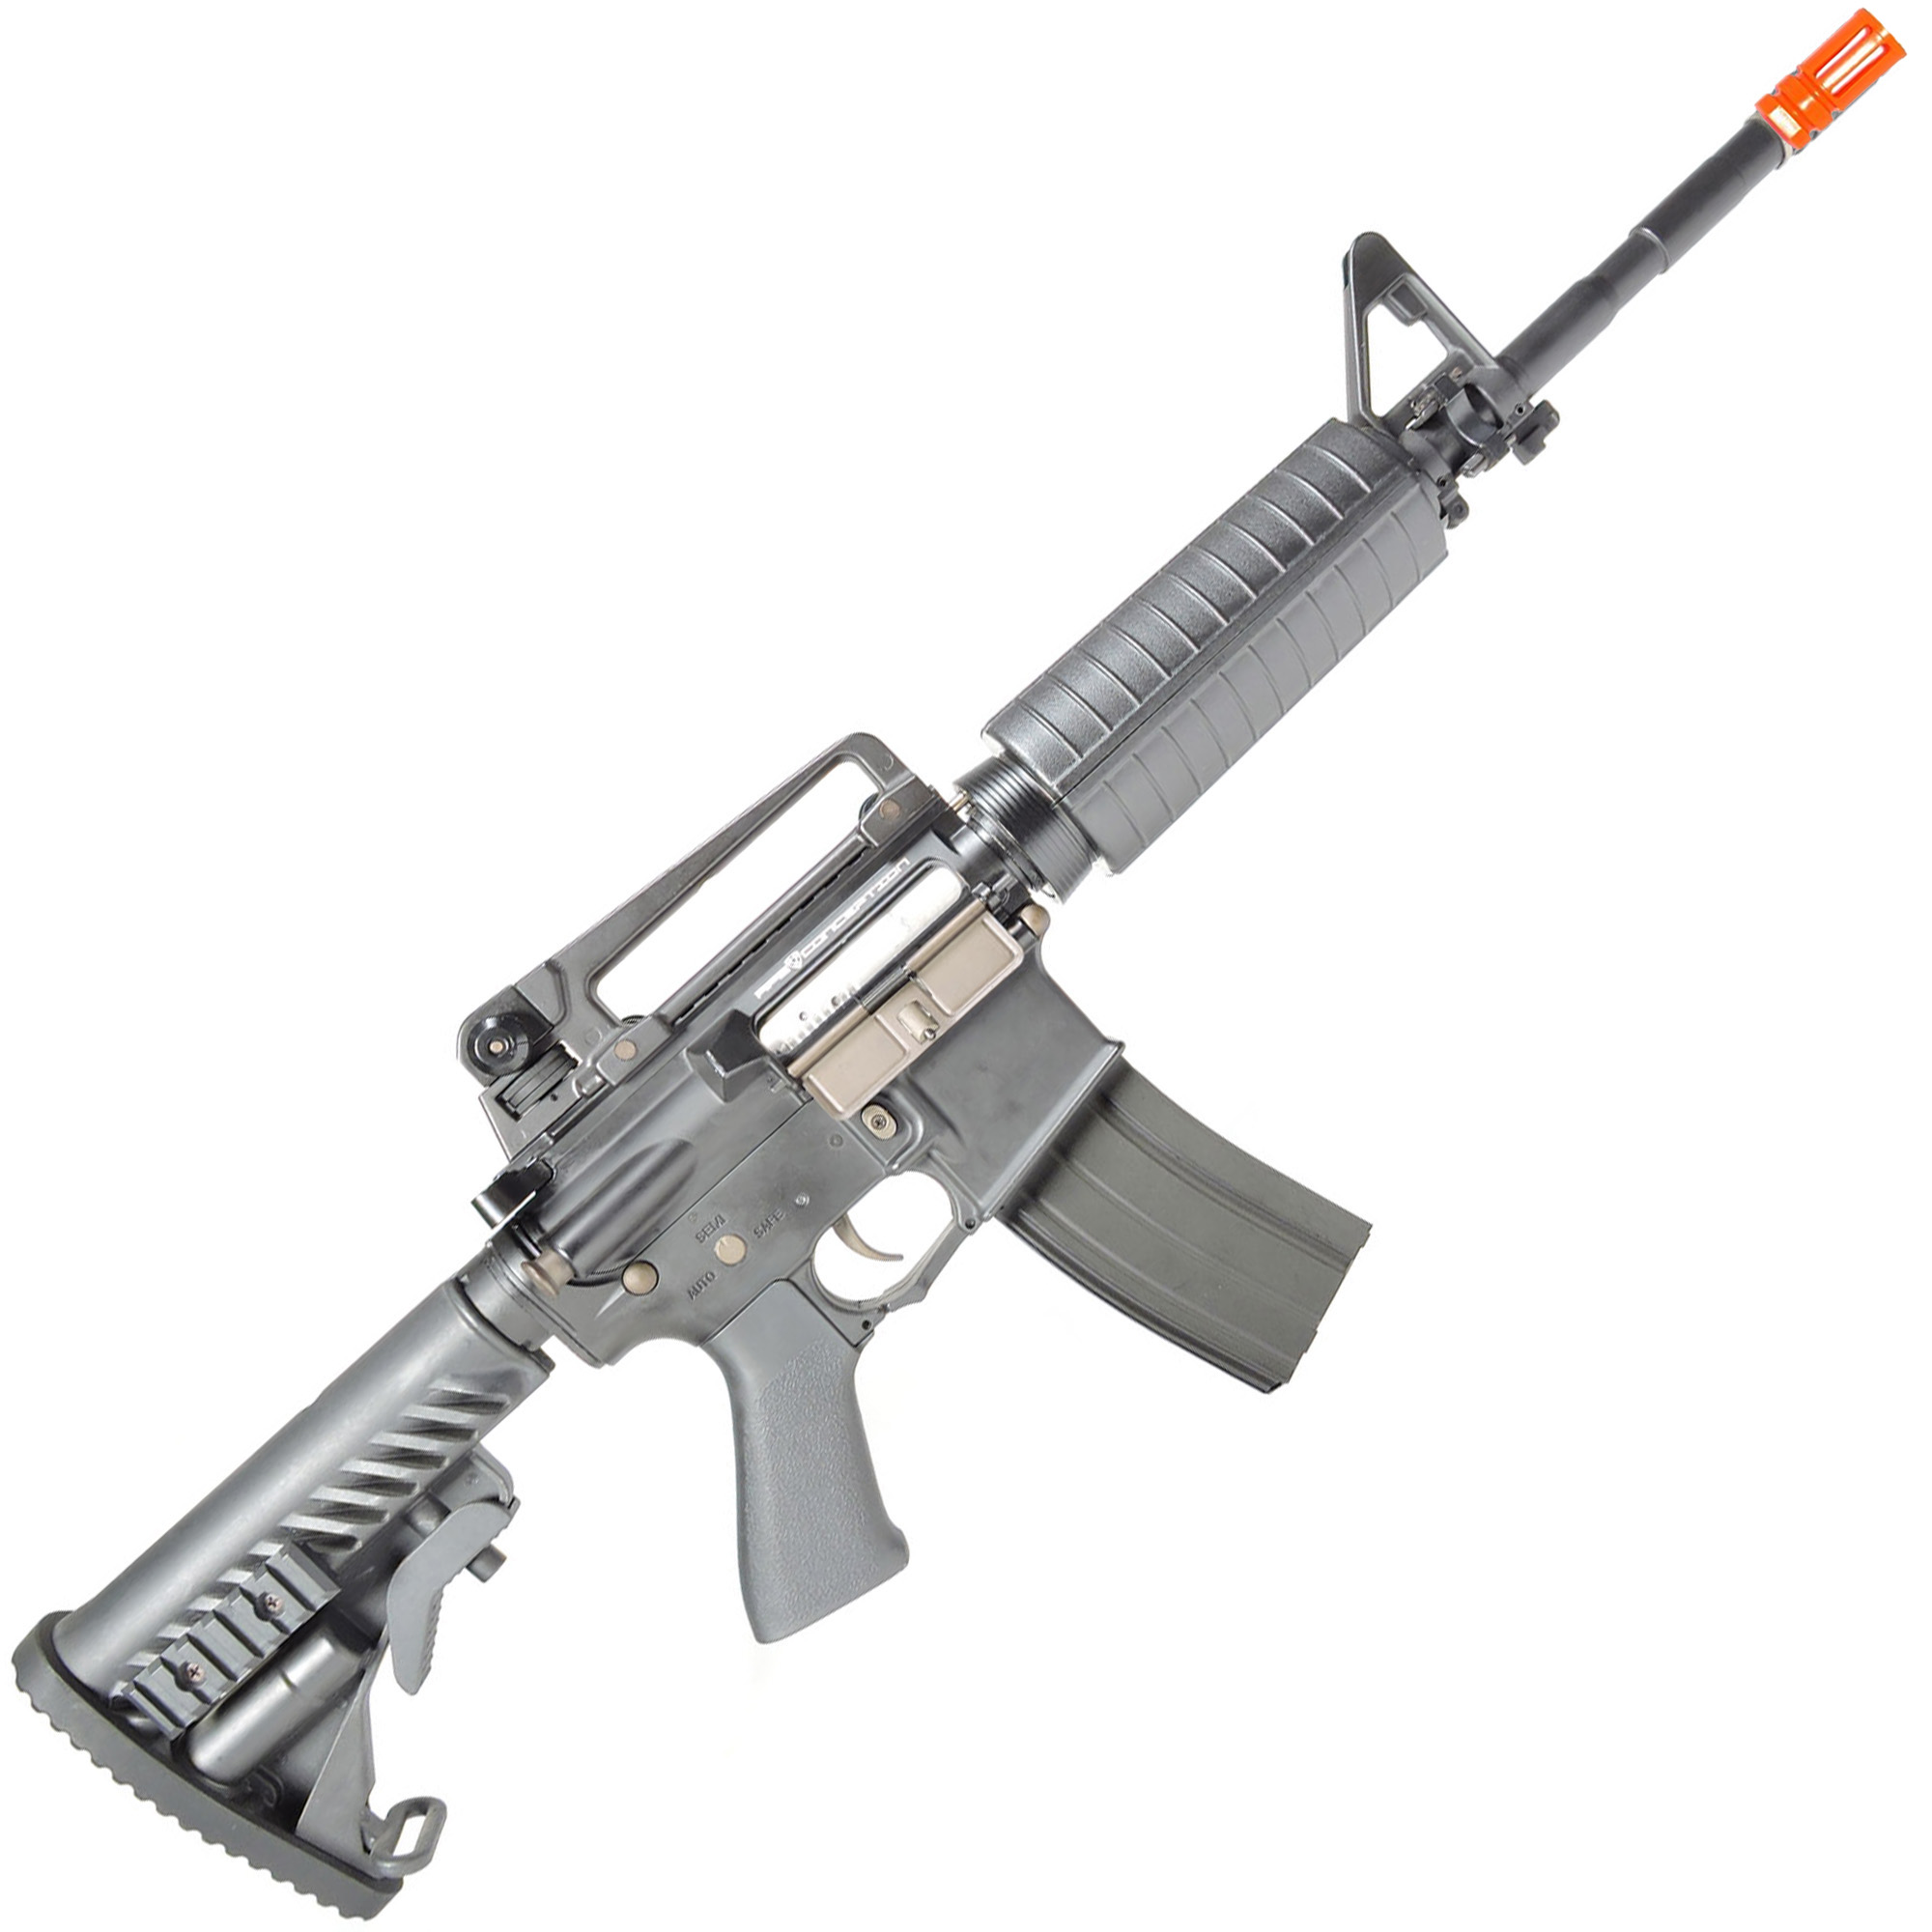 RIFLE AIRSOFT AEG M4A1 STYLE FULL METAL BLOW BACK ASR101 - APS